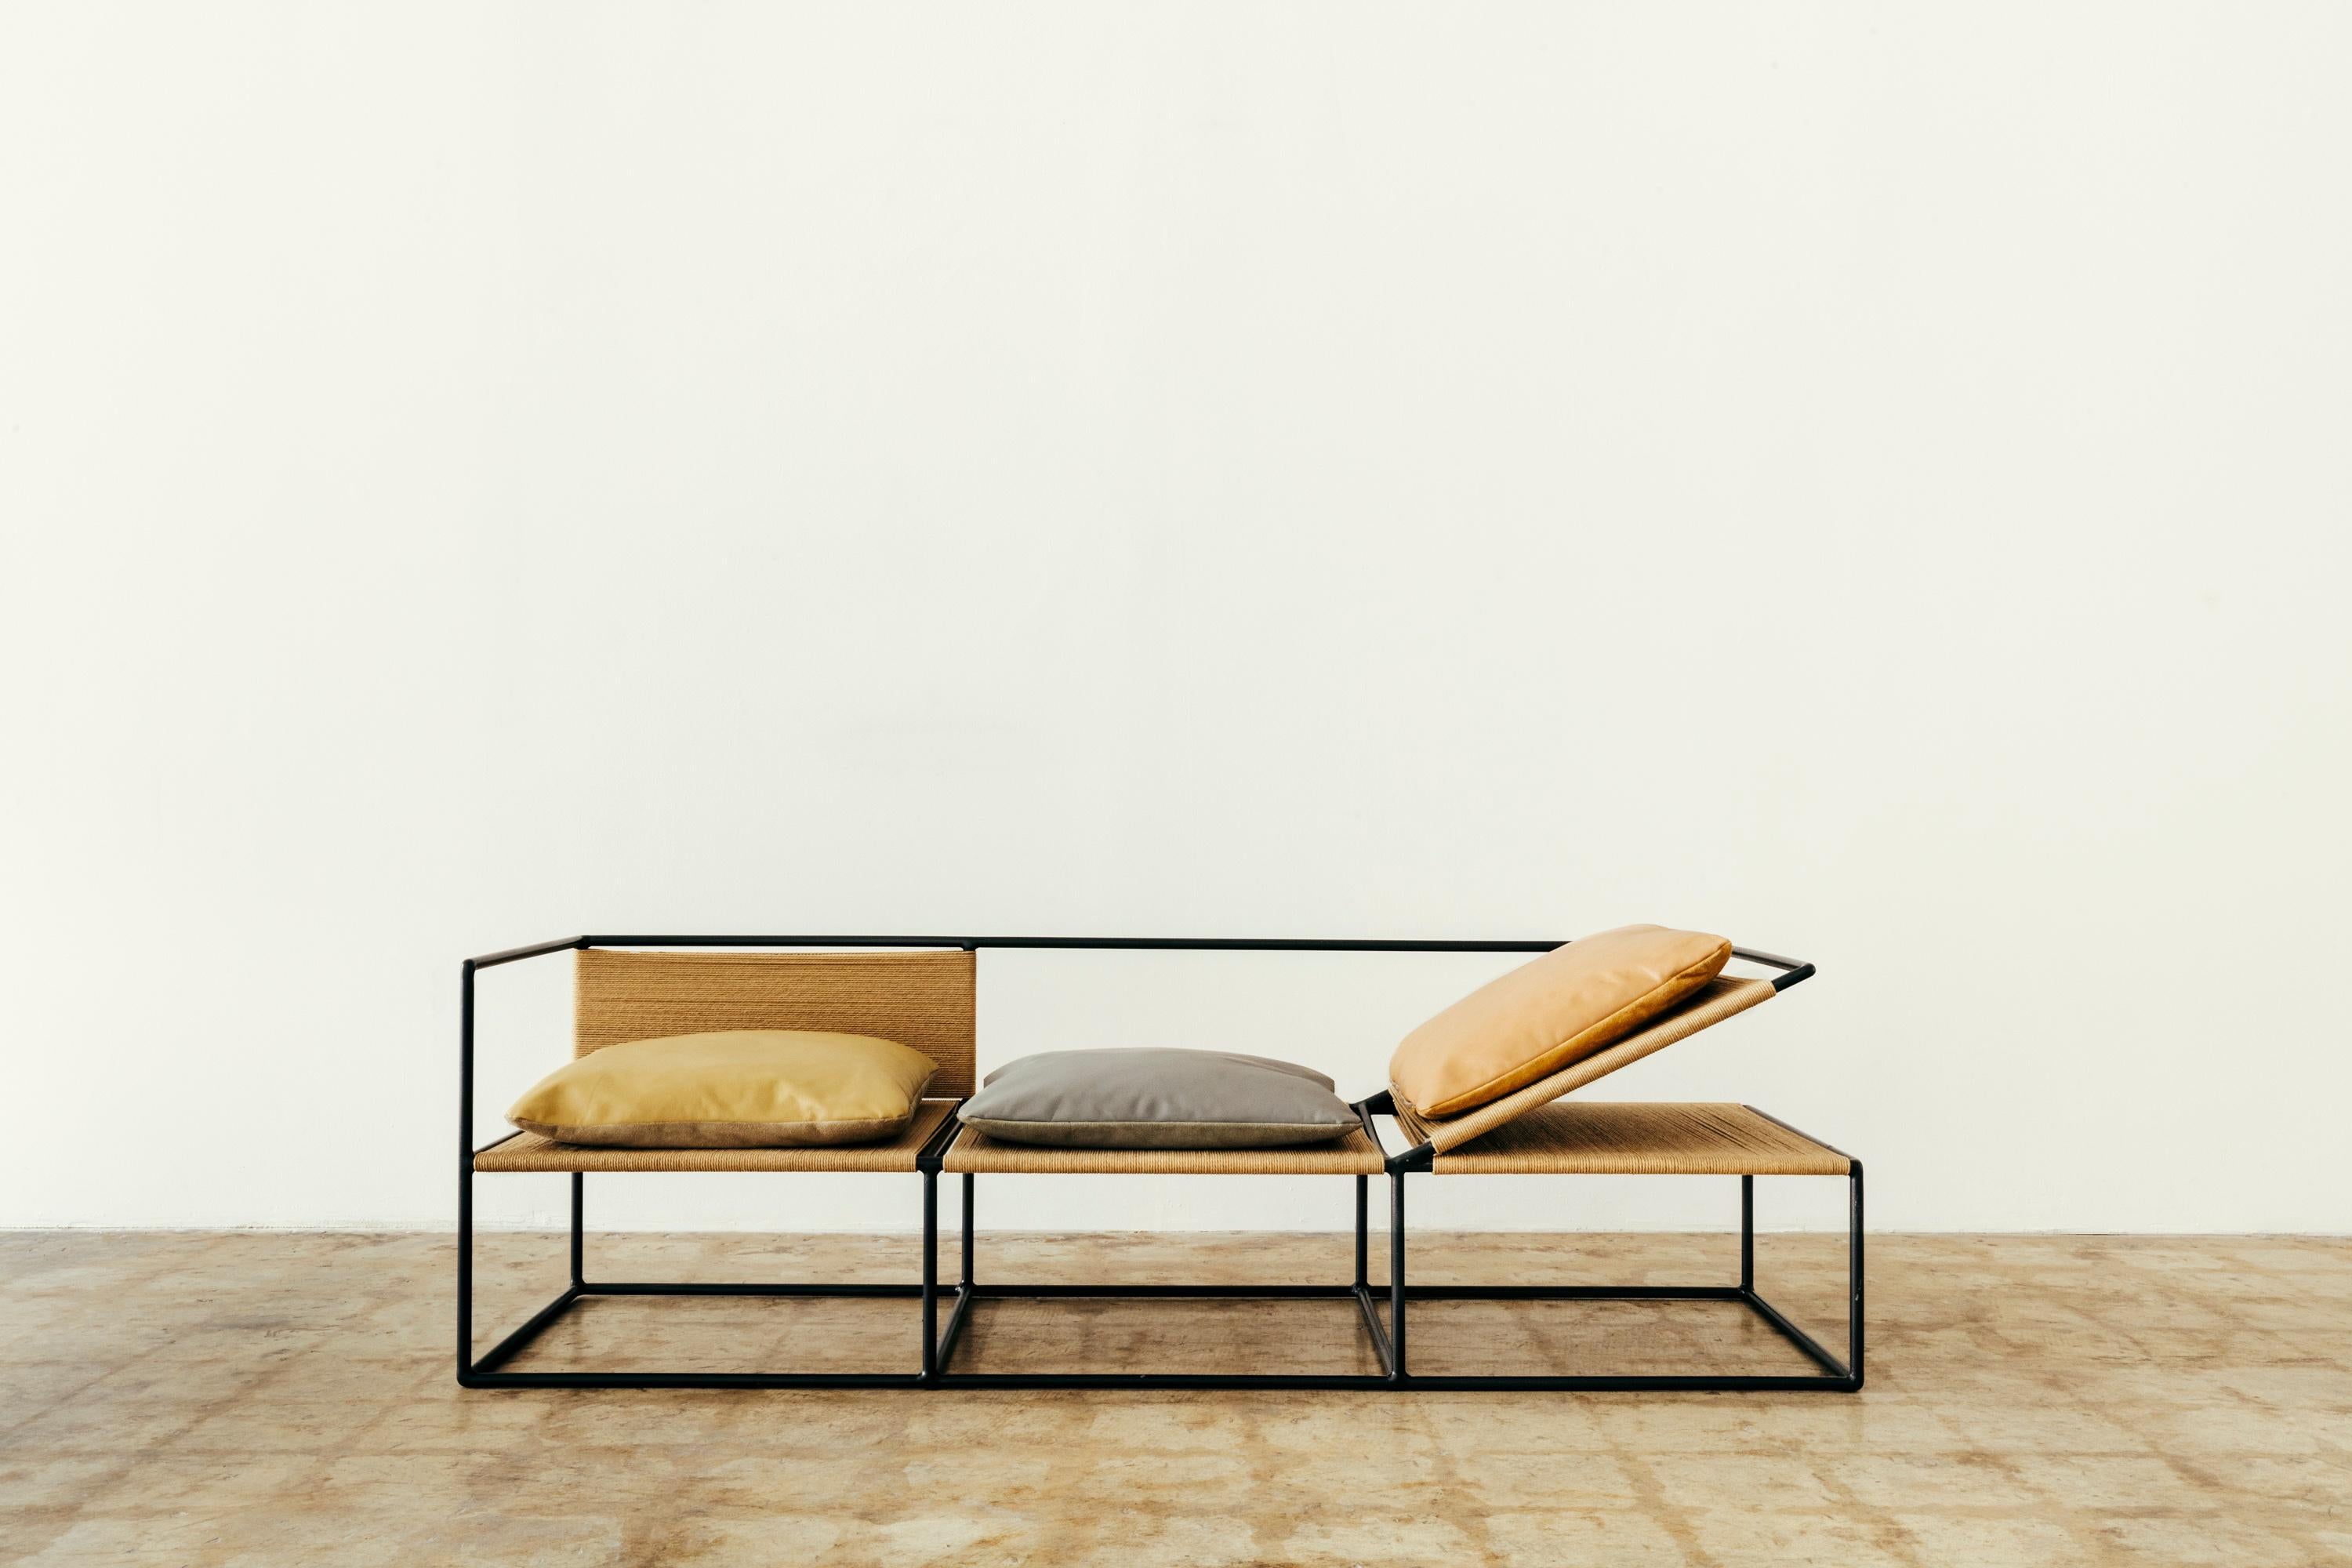 Silla Cable is a contemporary chaise lounge chair. The raw material pallet renders a new form of luxury good, less interested in the immediacy of image and aware of the value in calculated degradation.

The chair is made from a raw steel frame woven